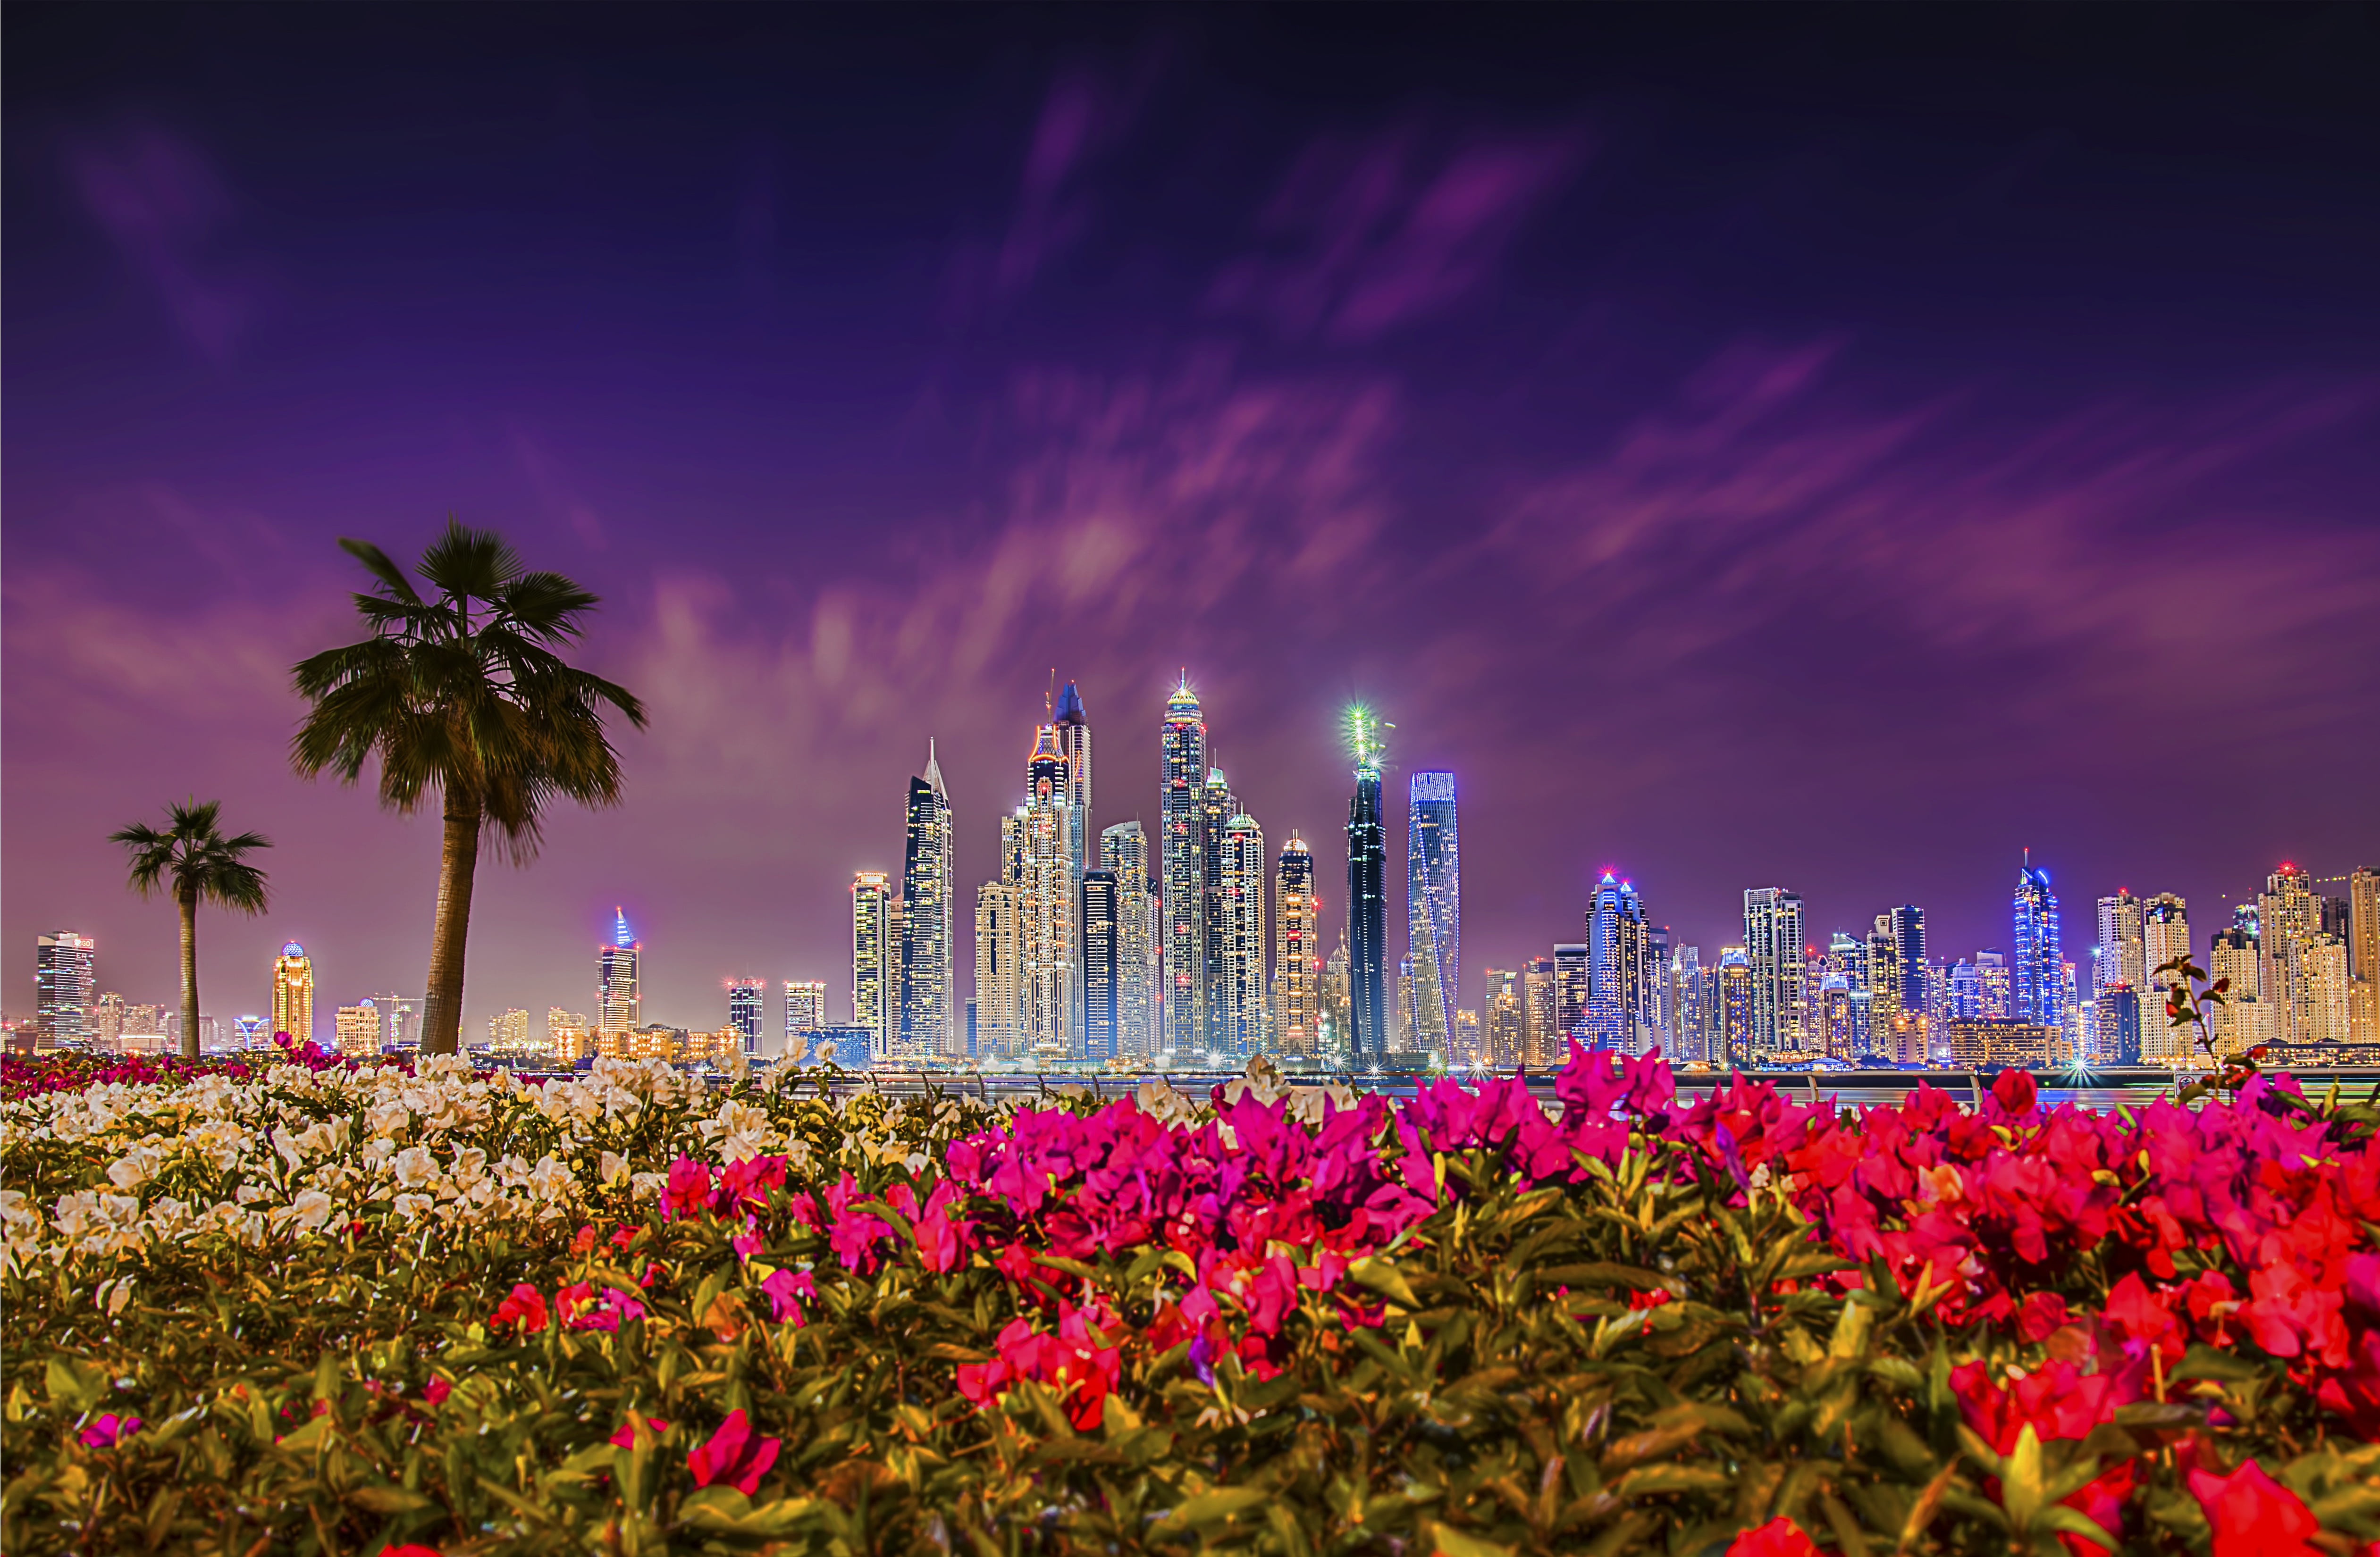 red rhododendron flowers, sunset, palm trees, building, Dubai